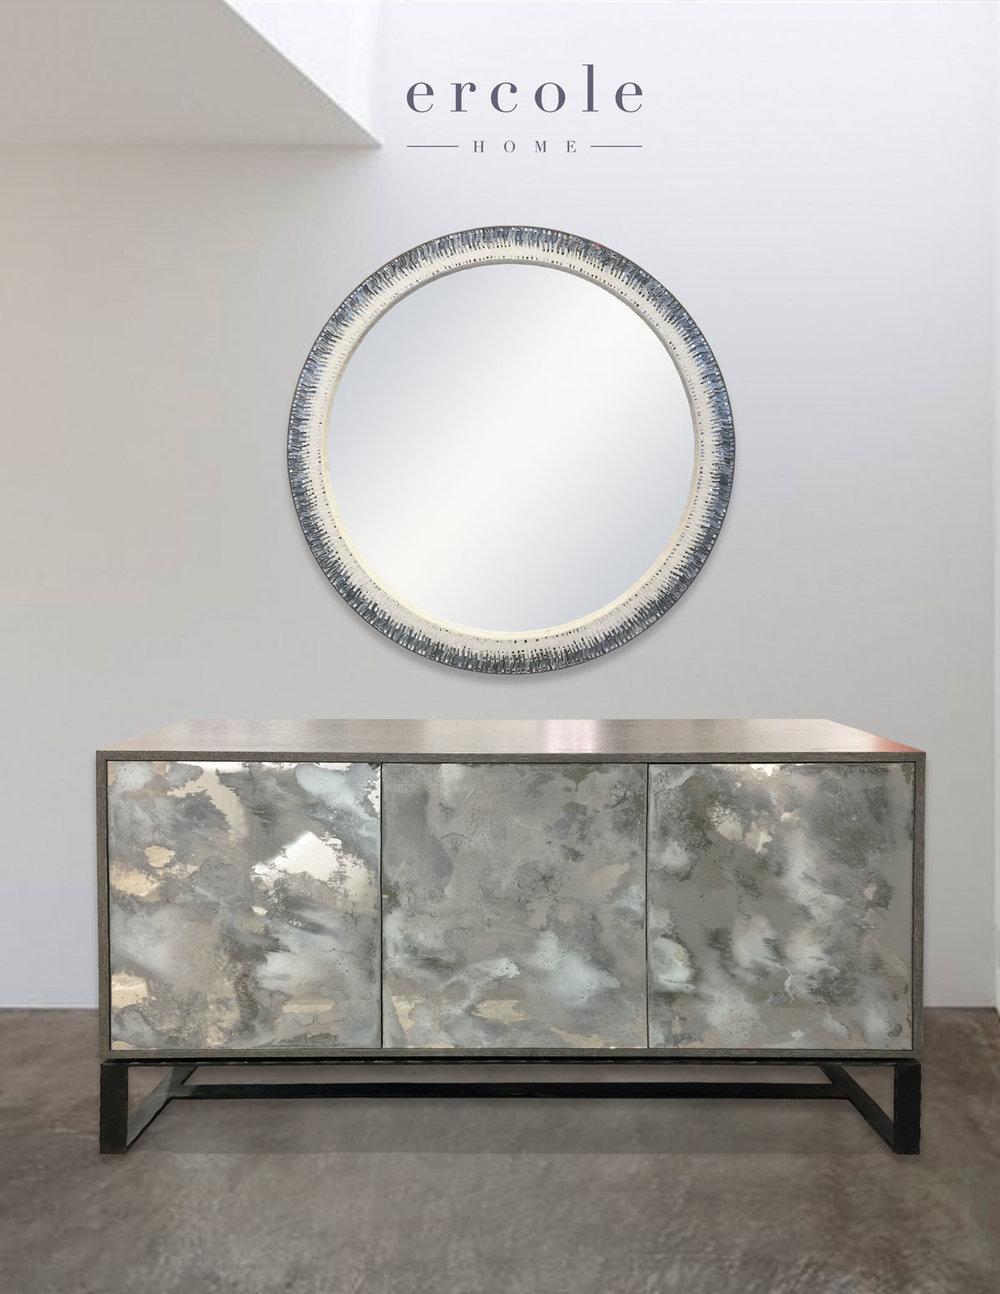 What makes this piece special is the combination of the Antique mirror front doors inserted in a wood case and the forged metal base.
Inspired by the Antique Venetian and French mirror furniture, this piece is a modern interpretation by Ercole